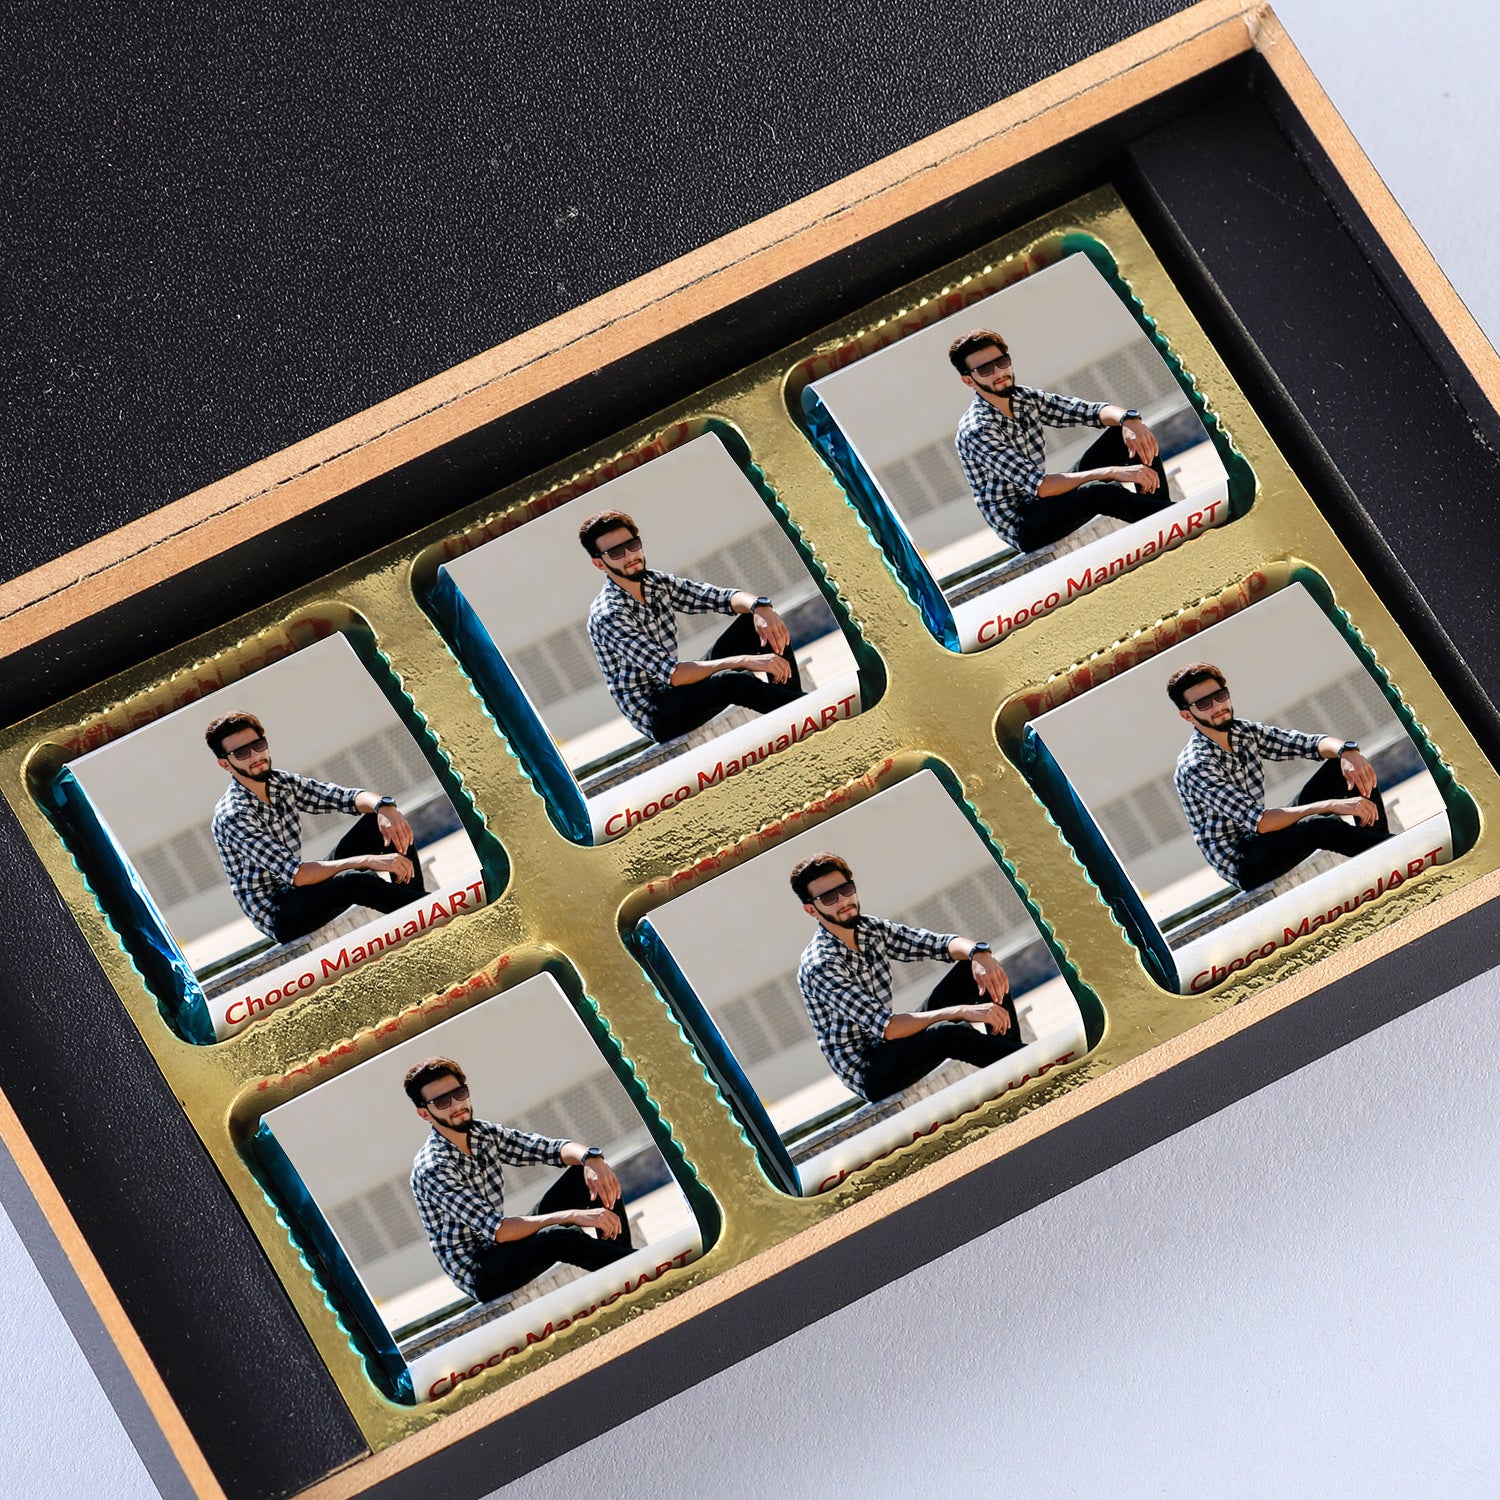  Customised gifts with name and photo printed on chocolate wrapperchocolates with a special message printed on them.